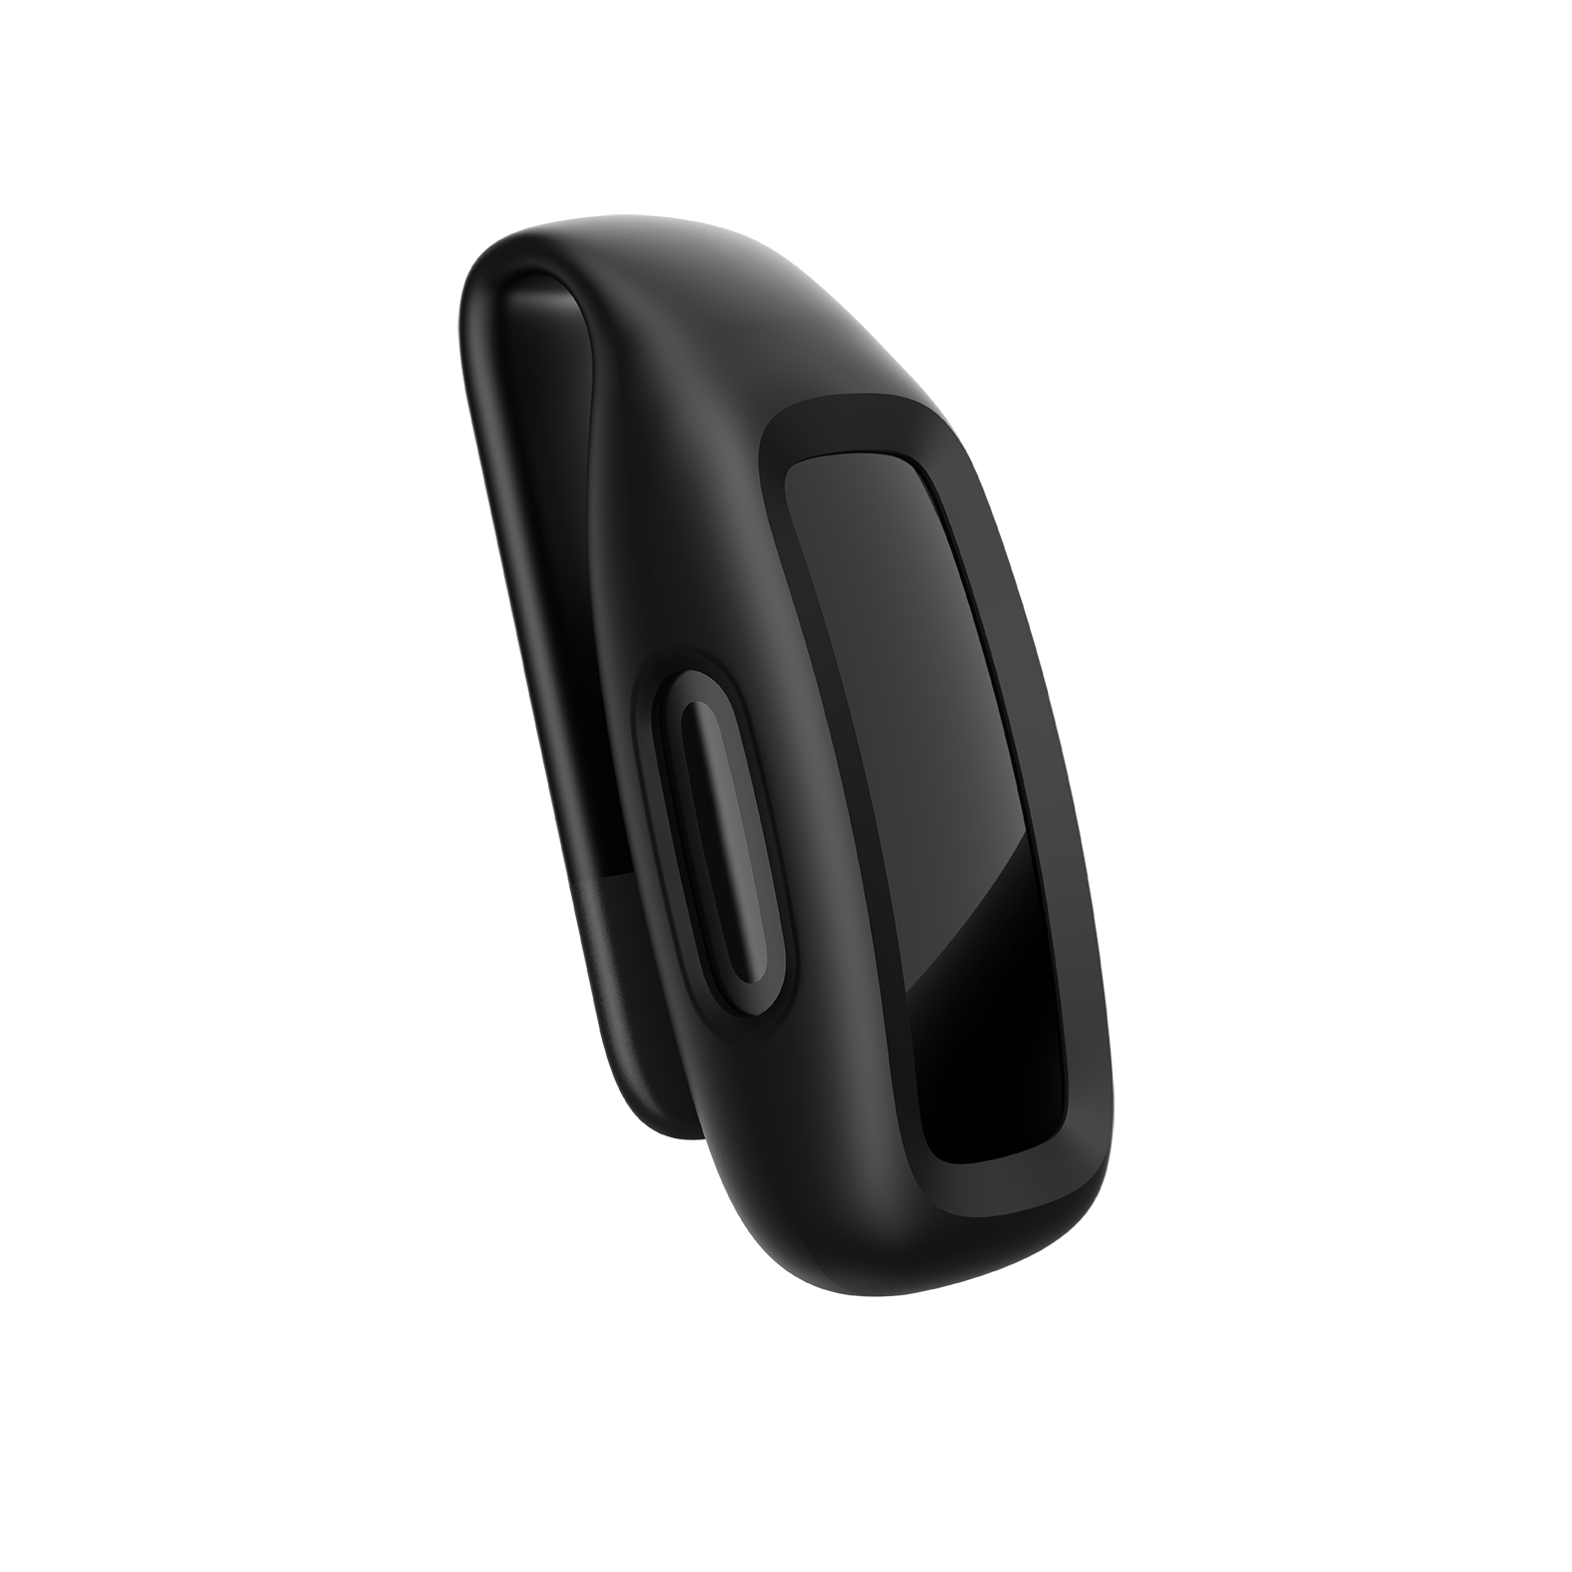 clip for fitbit versa